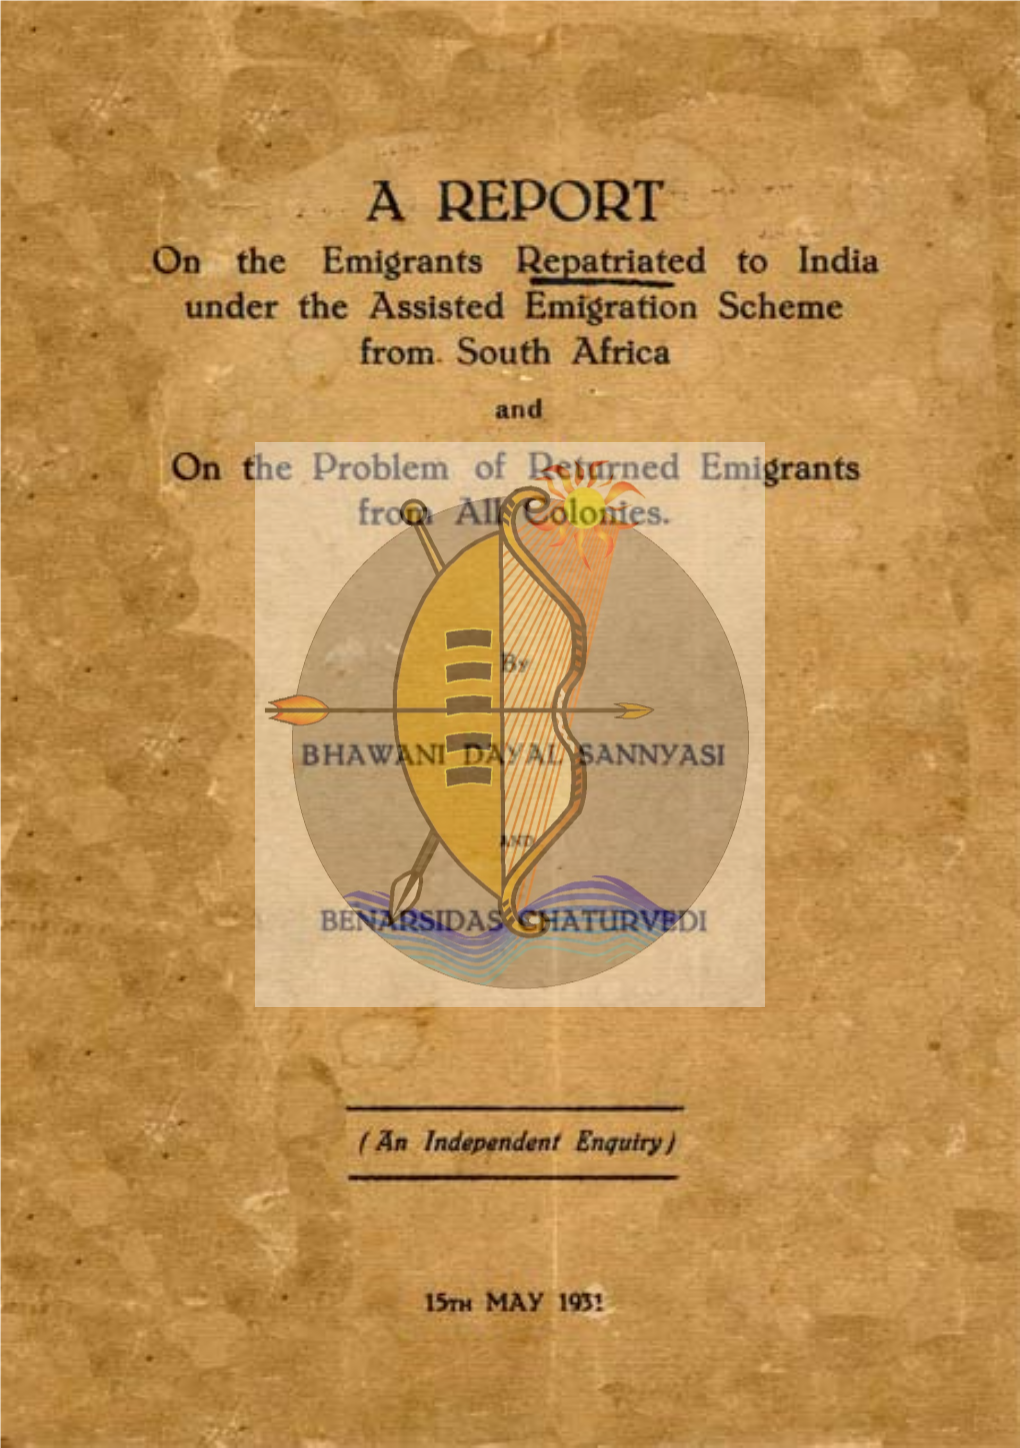 A REPORT Oo the Emigrants Repatriated to India Under the Assisted Emigration Scheme From